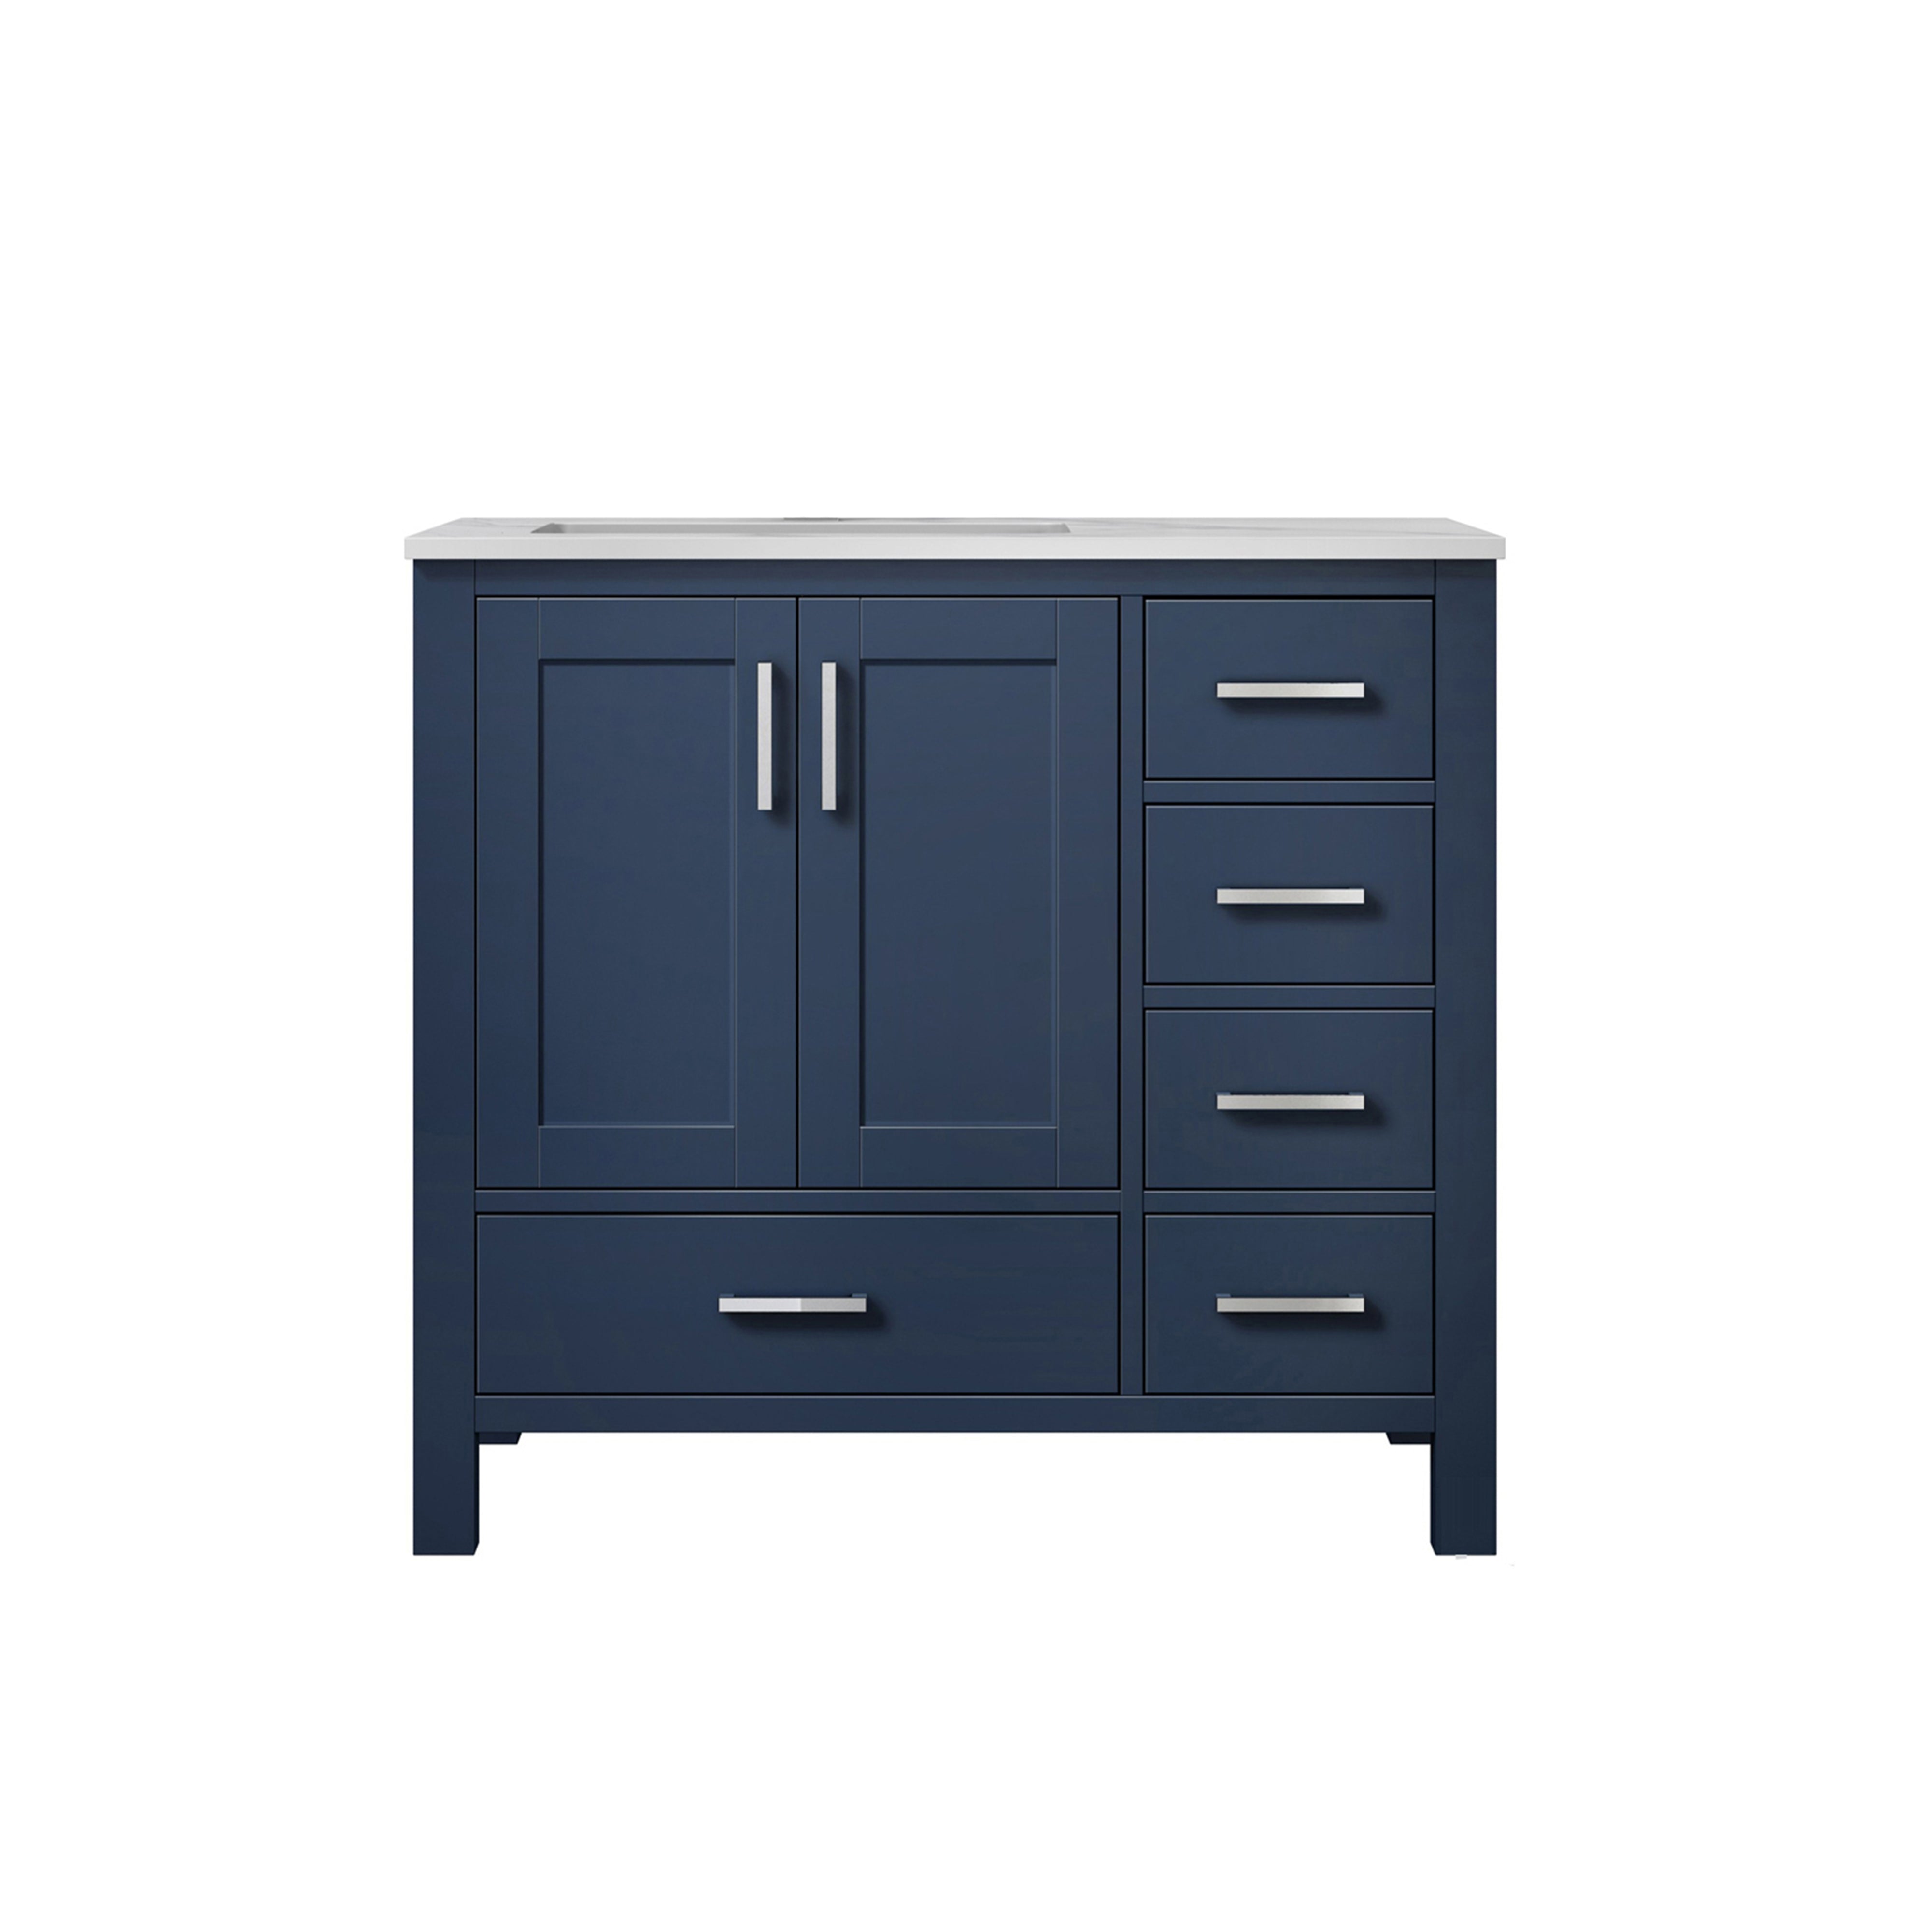 Lexora Jacques LJ342236SEDS000-L 36" Single Bathroom Vanity in Navy Blue with White Carrara Marble, White Rectangle Sink on Left, Front View